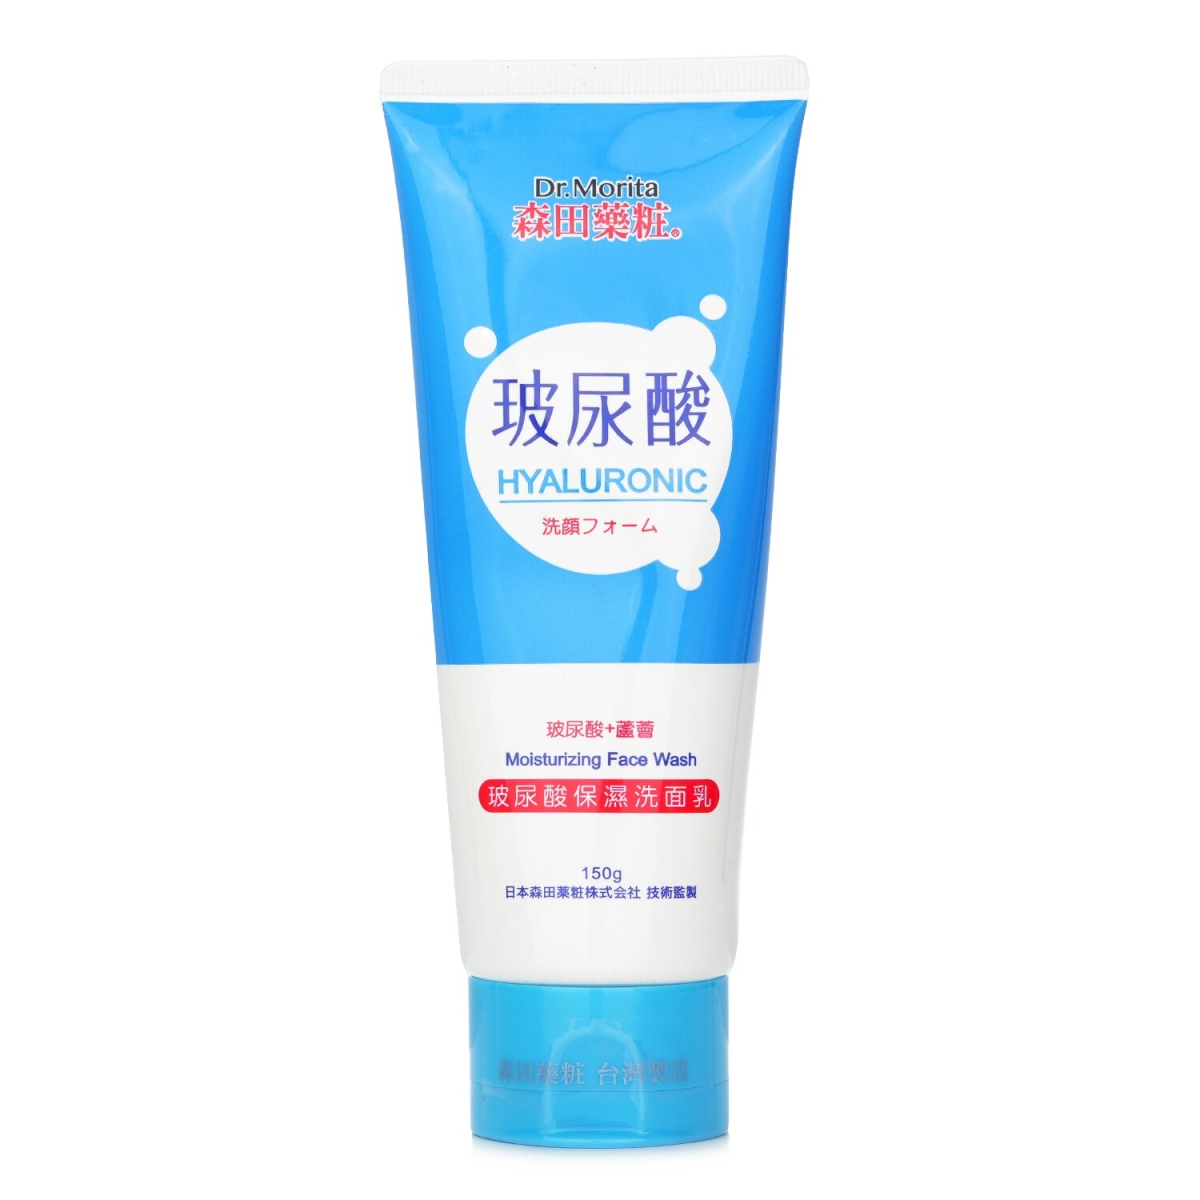 Picture of Dr. Morita 331522 150 g Hyaluronic Moisturizing Face Wash